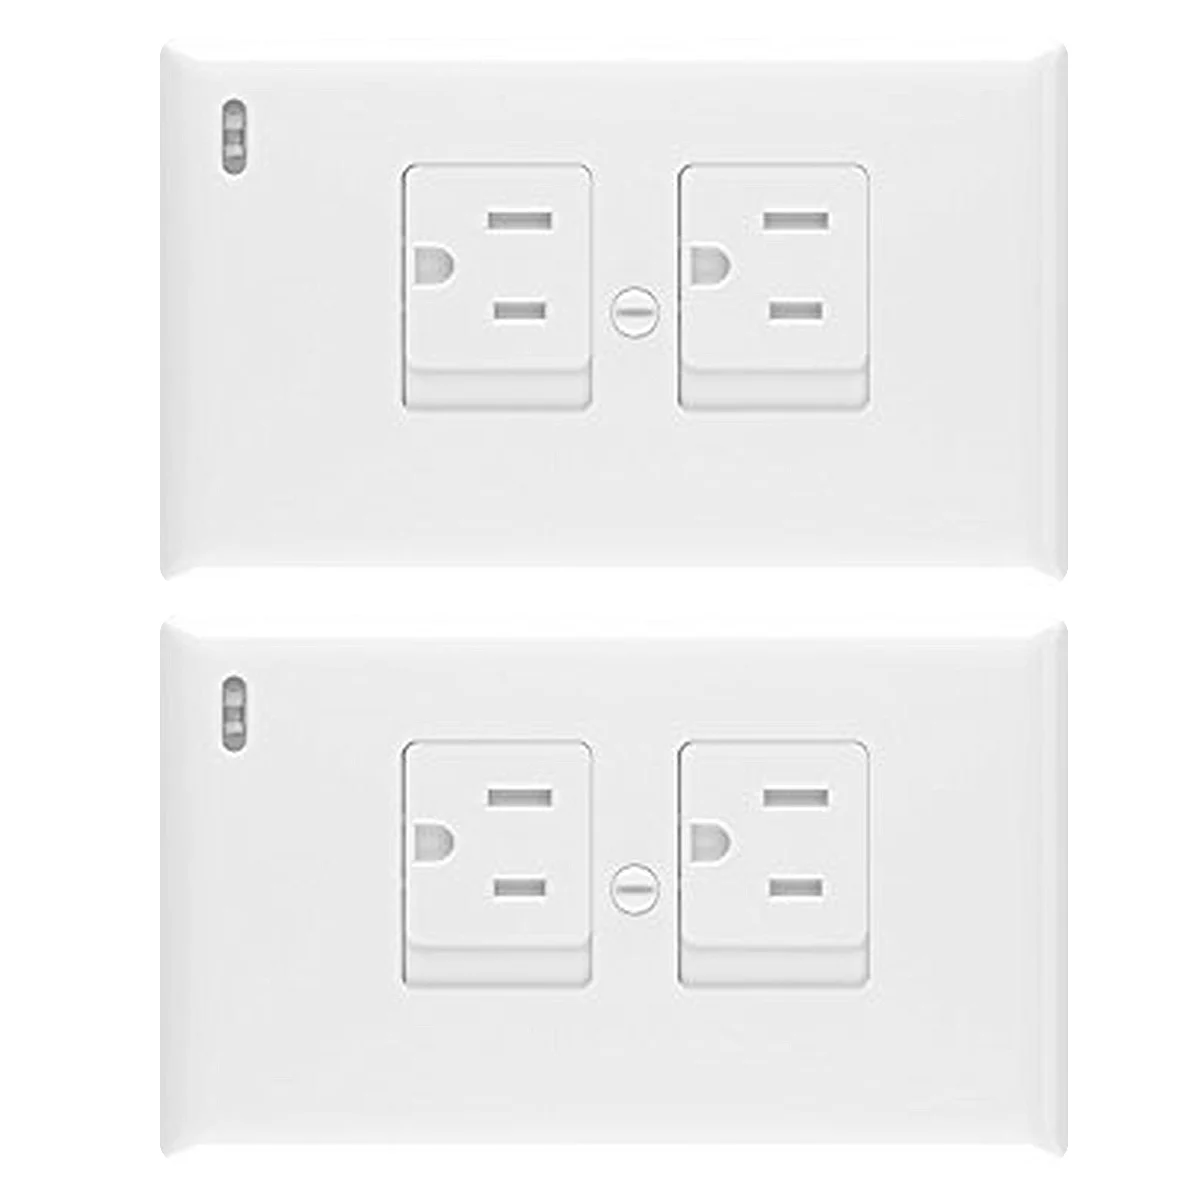 

3pcs Electric Outlet Waterproof Wall Socket Plate Panel Box Babyproof Outlet Cover Plug Covers